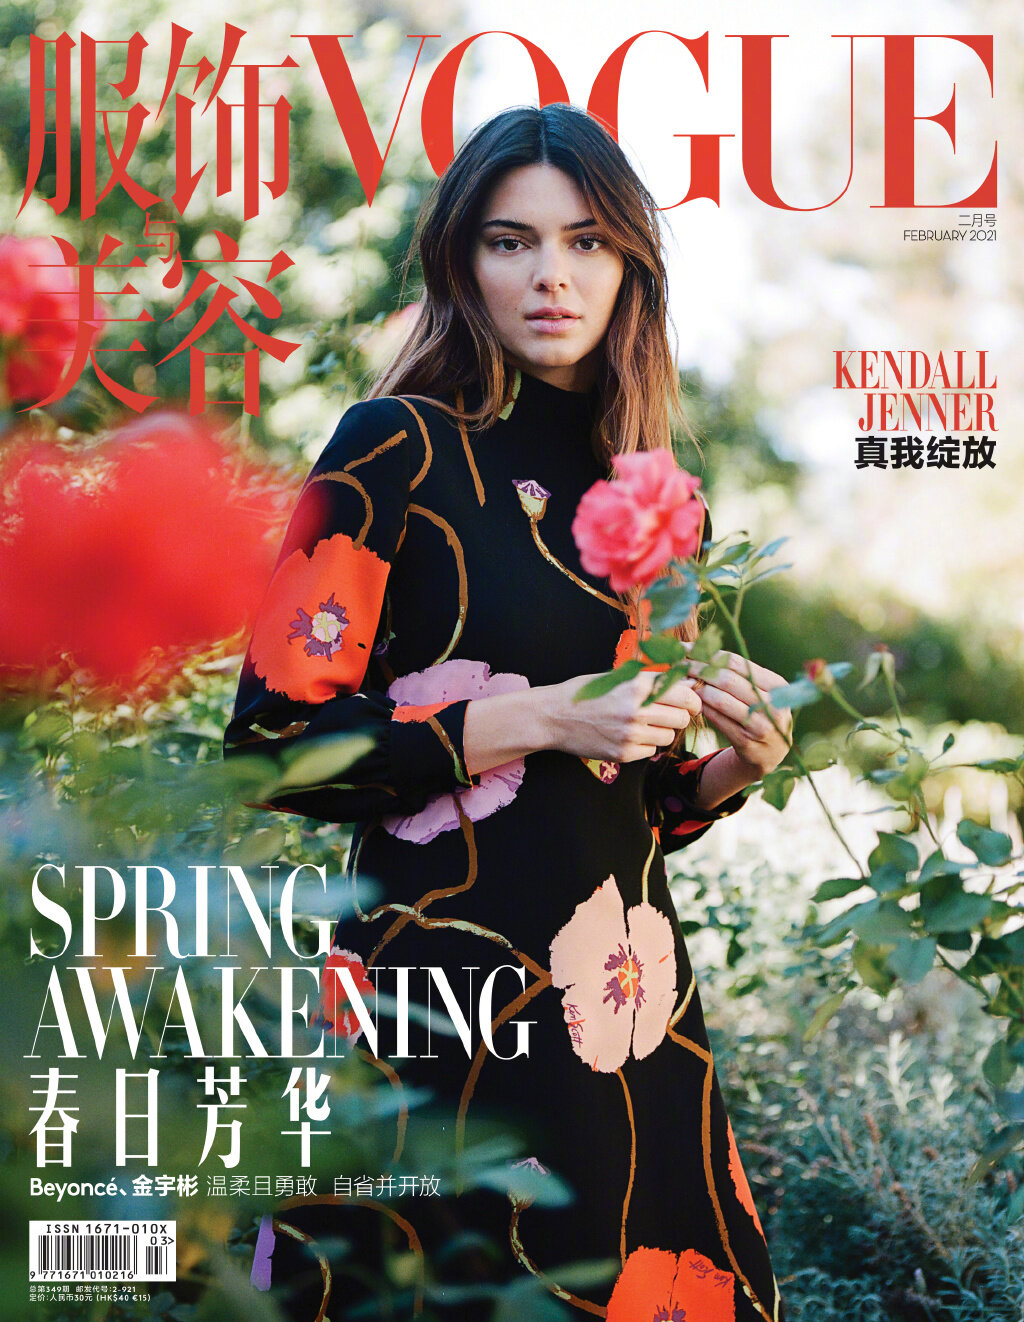 Kendall Jenner by Autumn de Wilde for Vogue China Feb 2021 (5).jpg